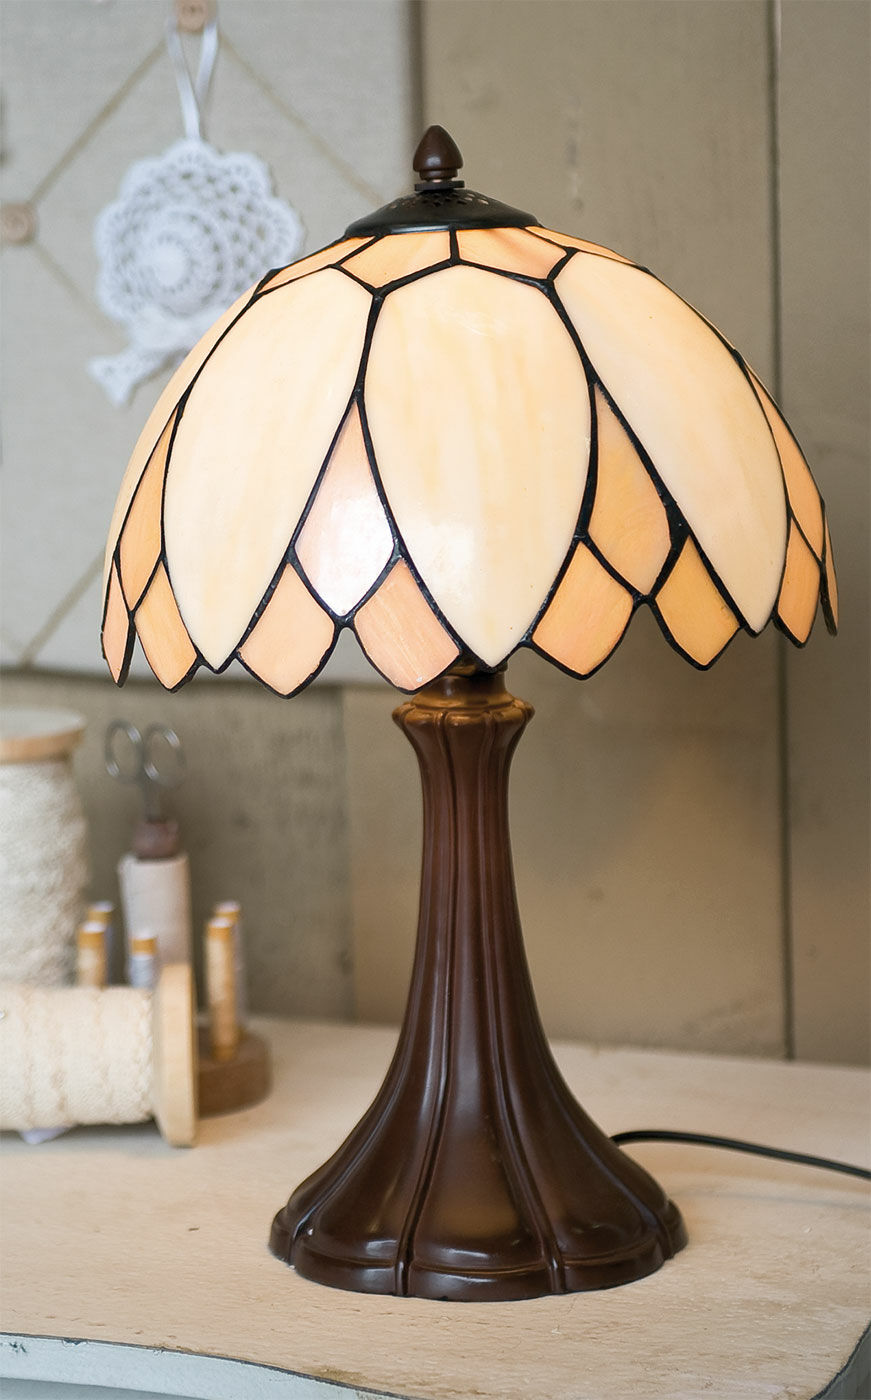 Table lamp "Strobile" - after Louis C. Tiffany